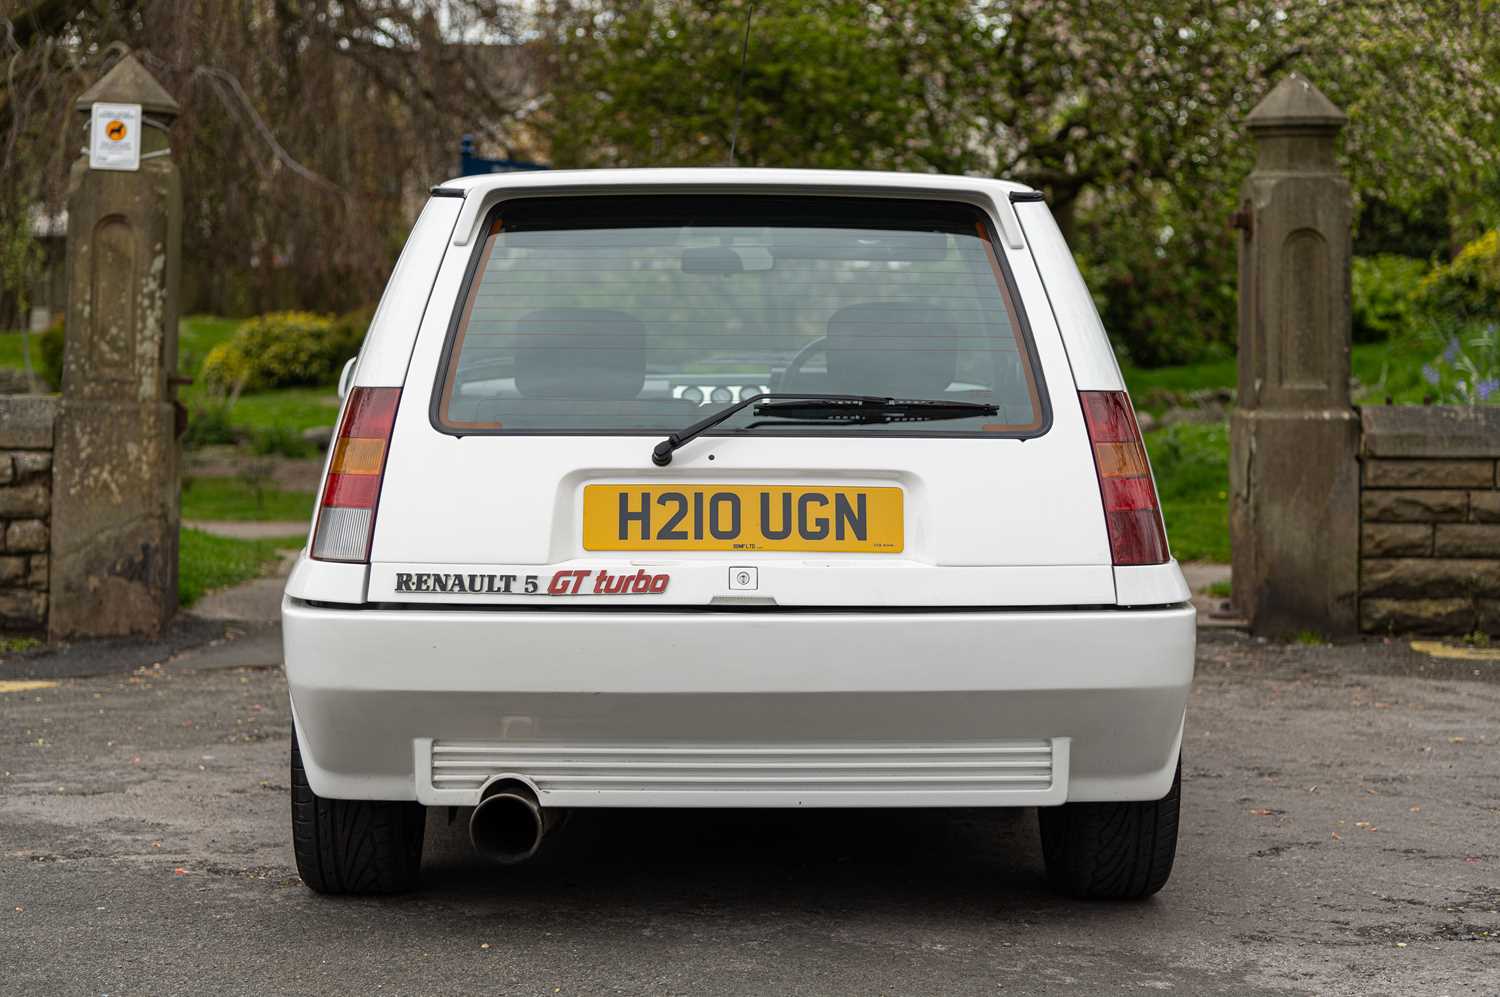 1990 Renault 5 GT Turbo - Image 13 of 79